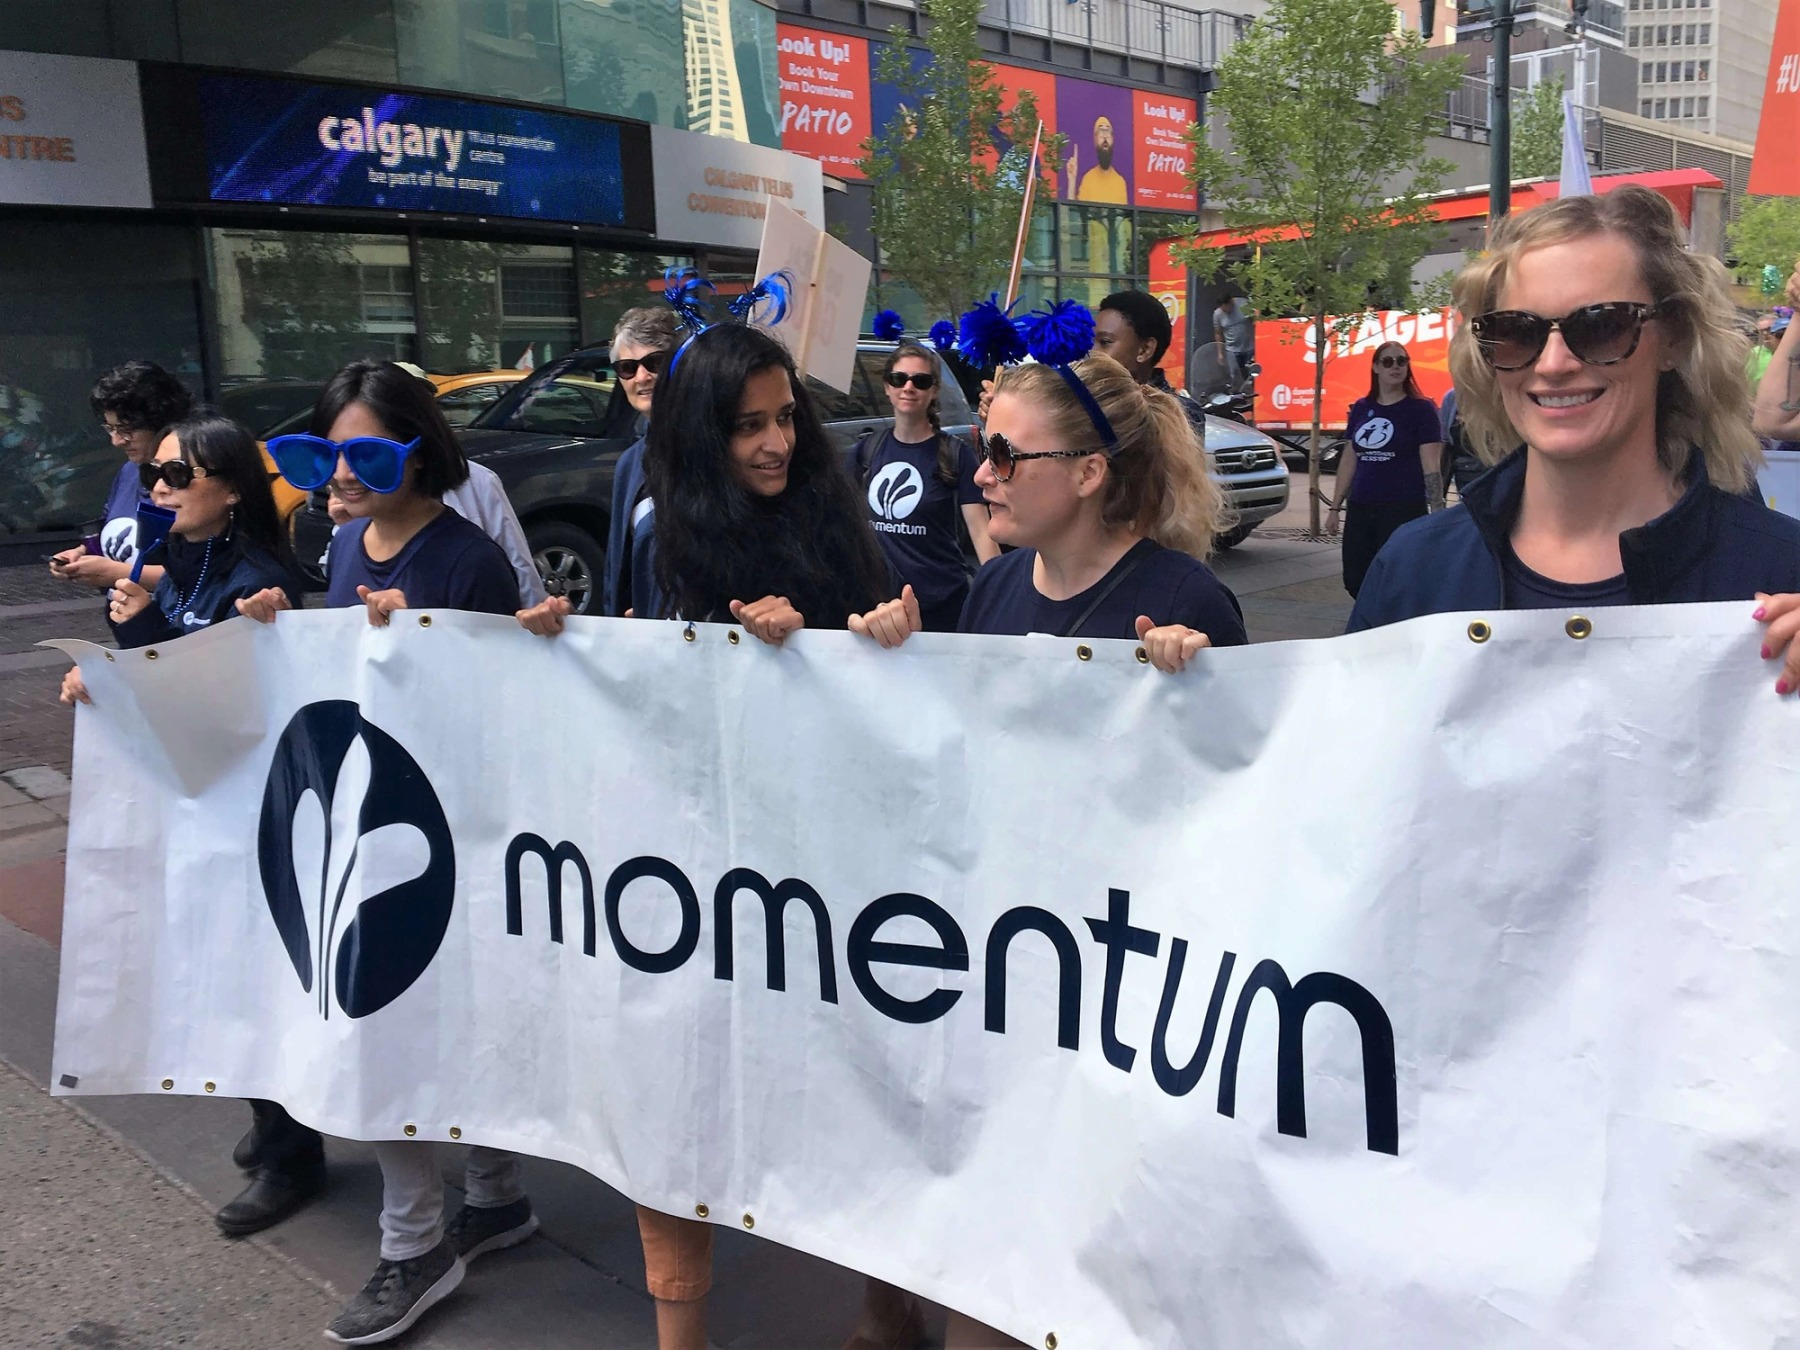 Staff and volunteers walking together, holding a "Momentum" banner, during the 2019 United Way Parade